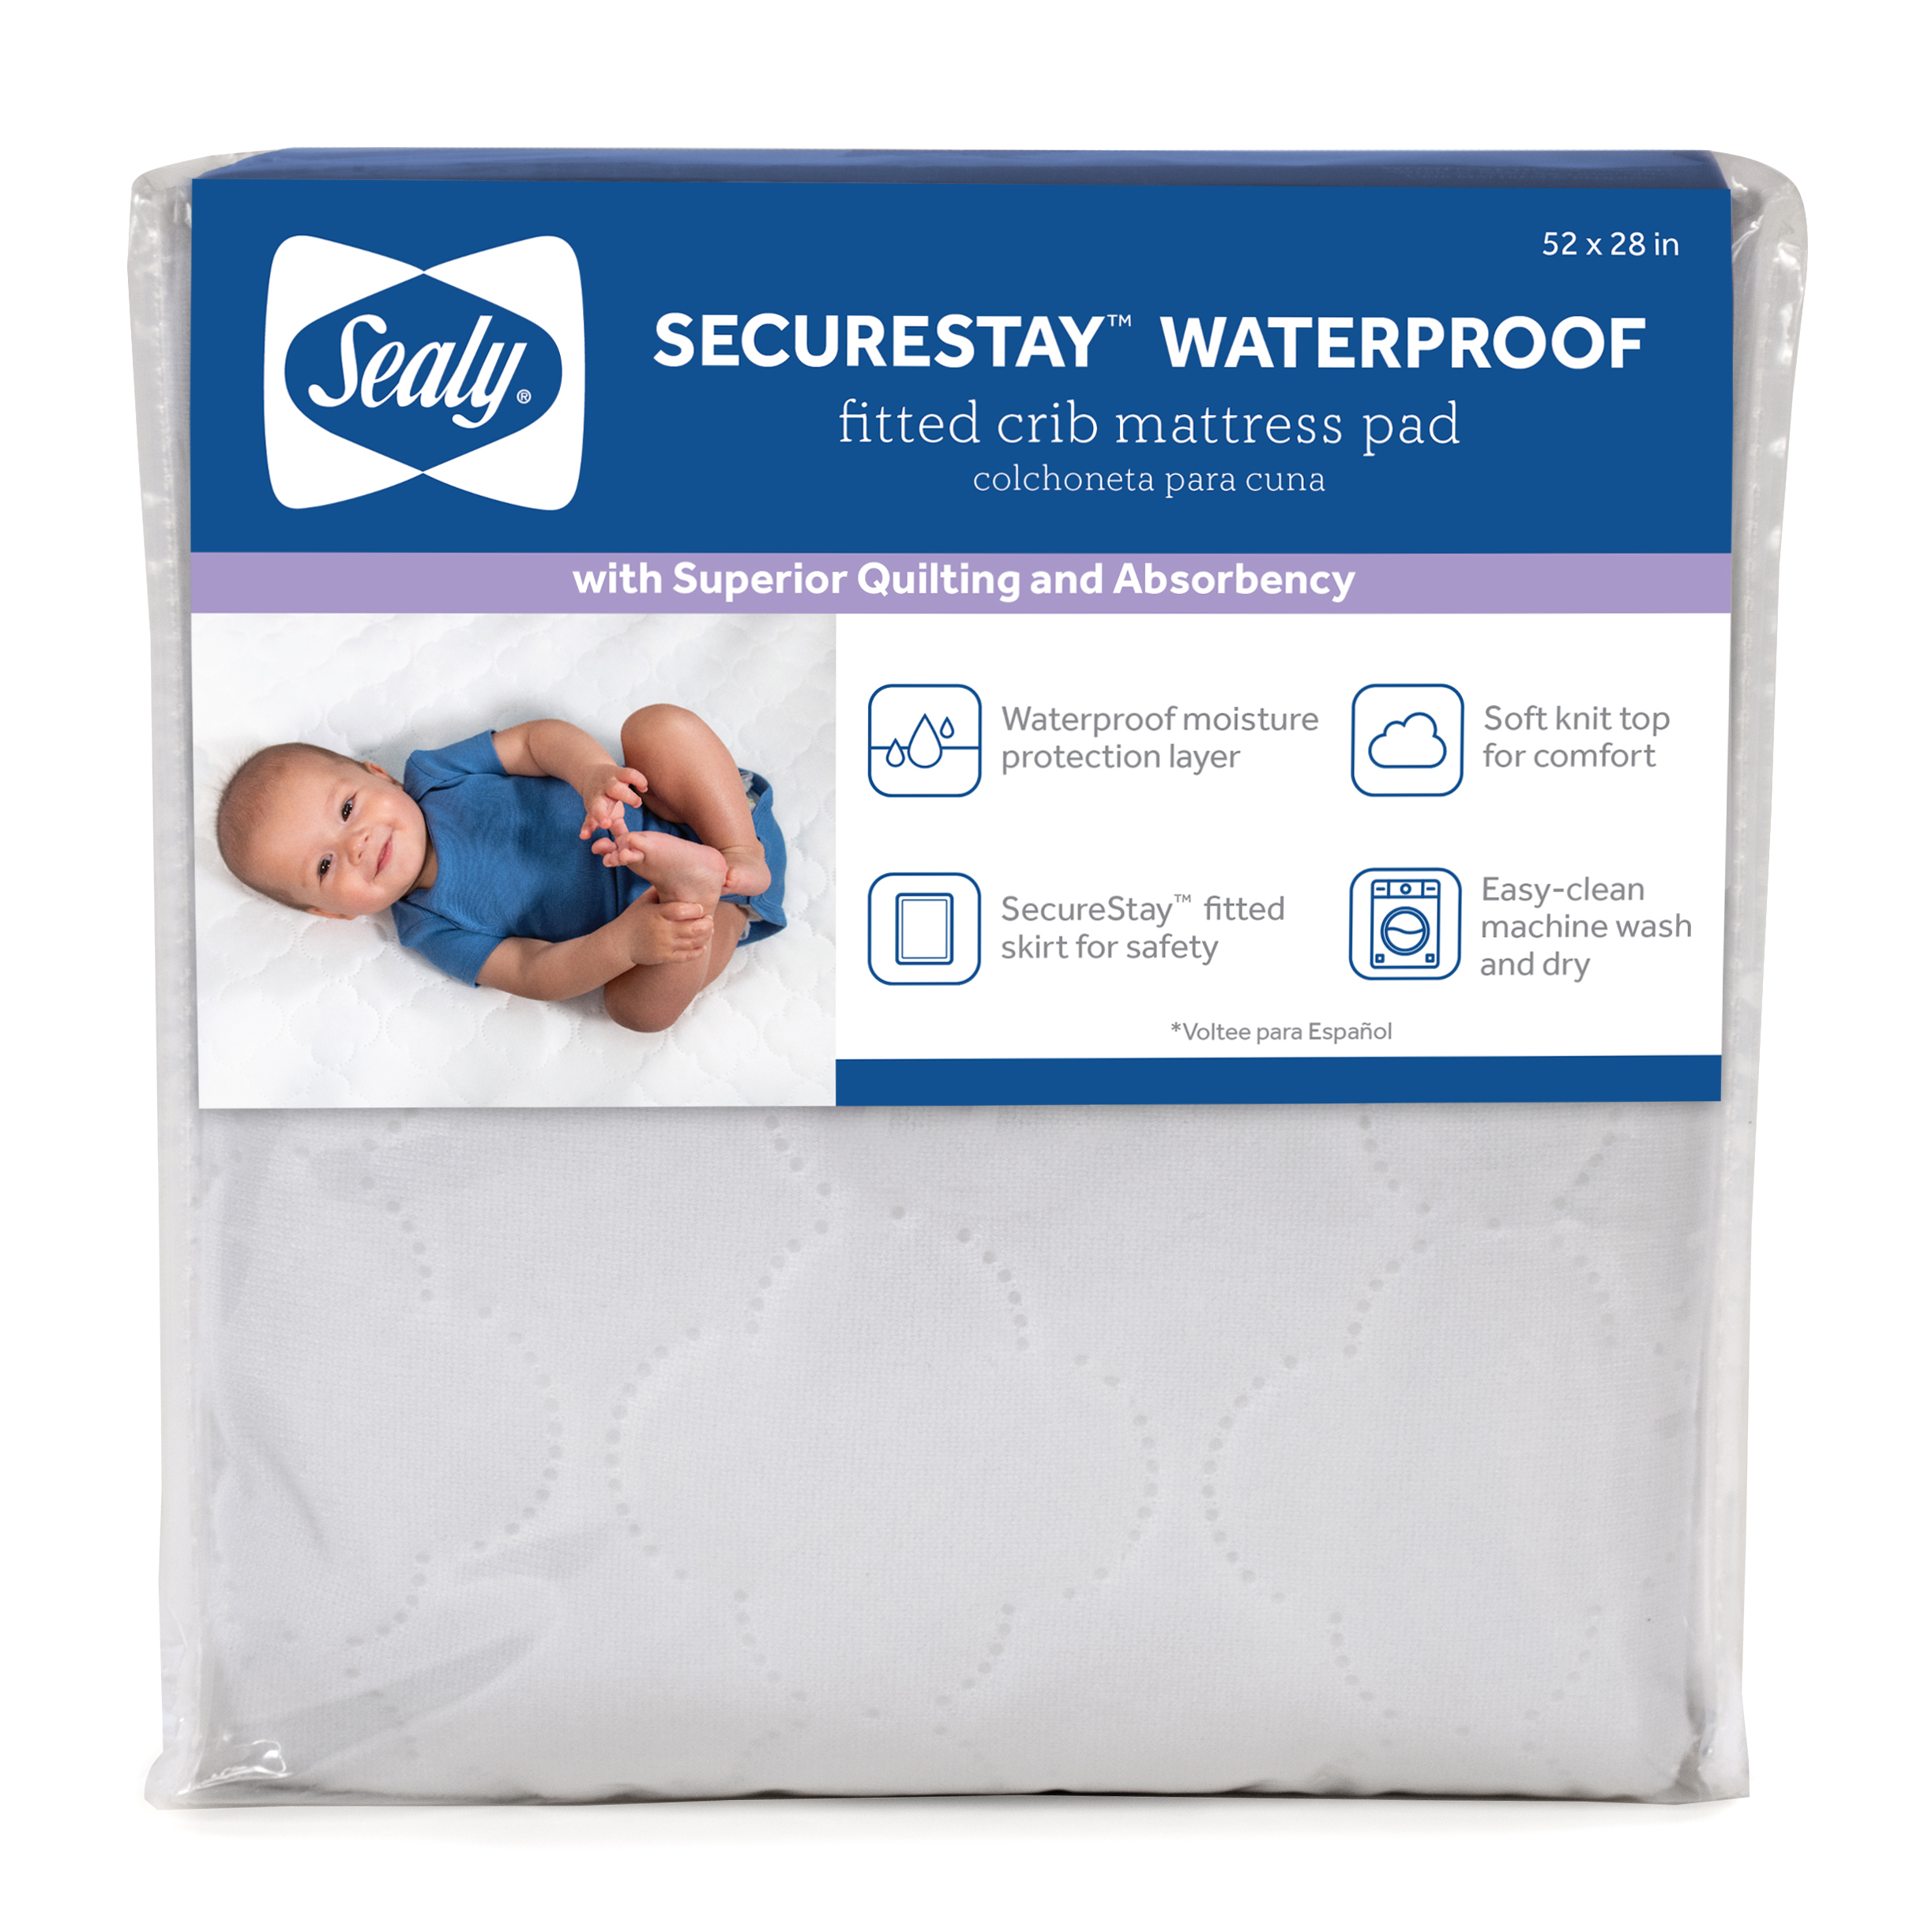 Sealy SecureStay Waterproof Crib Mattress Pads, Easy Clean Washable, Crib, White - image 1 of 13